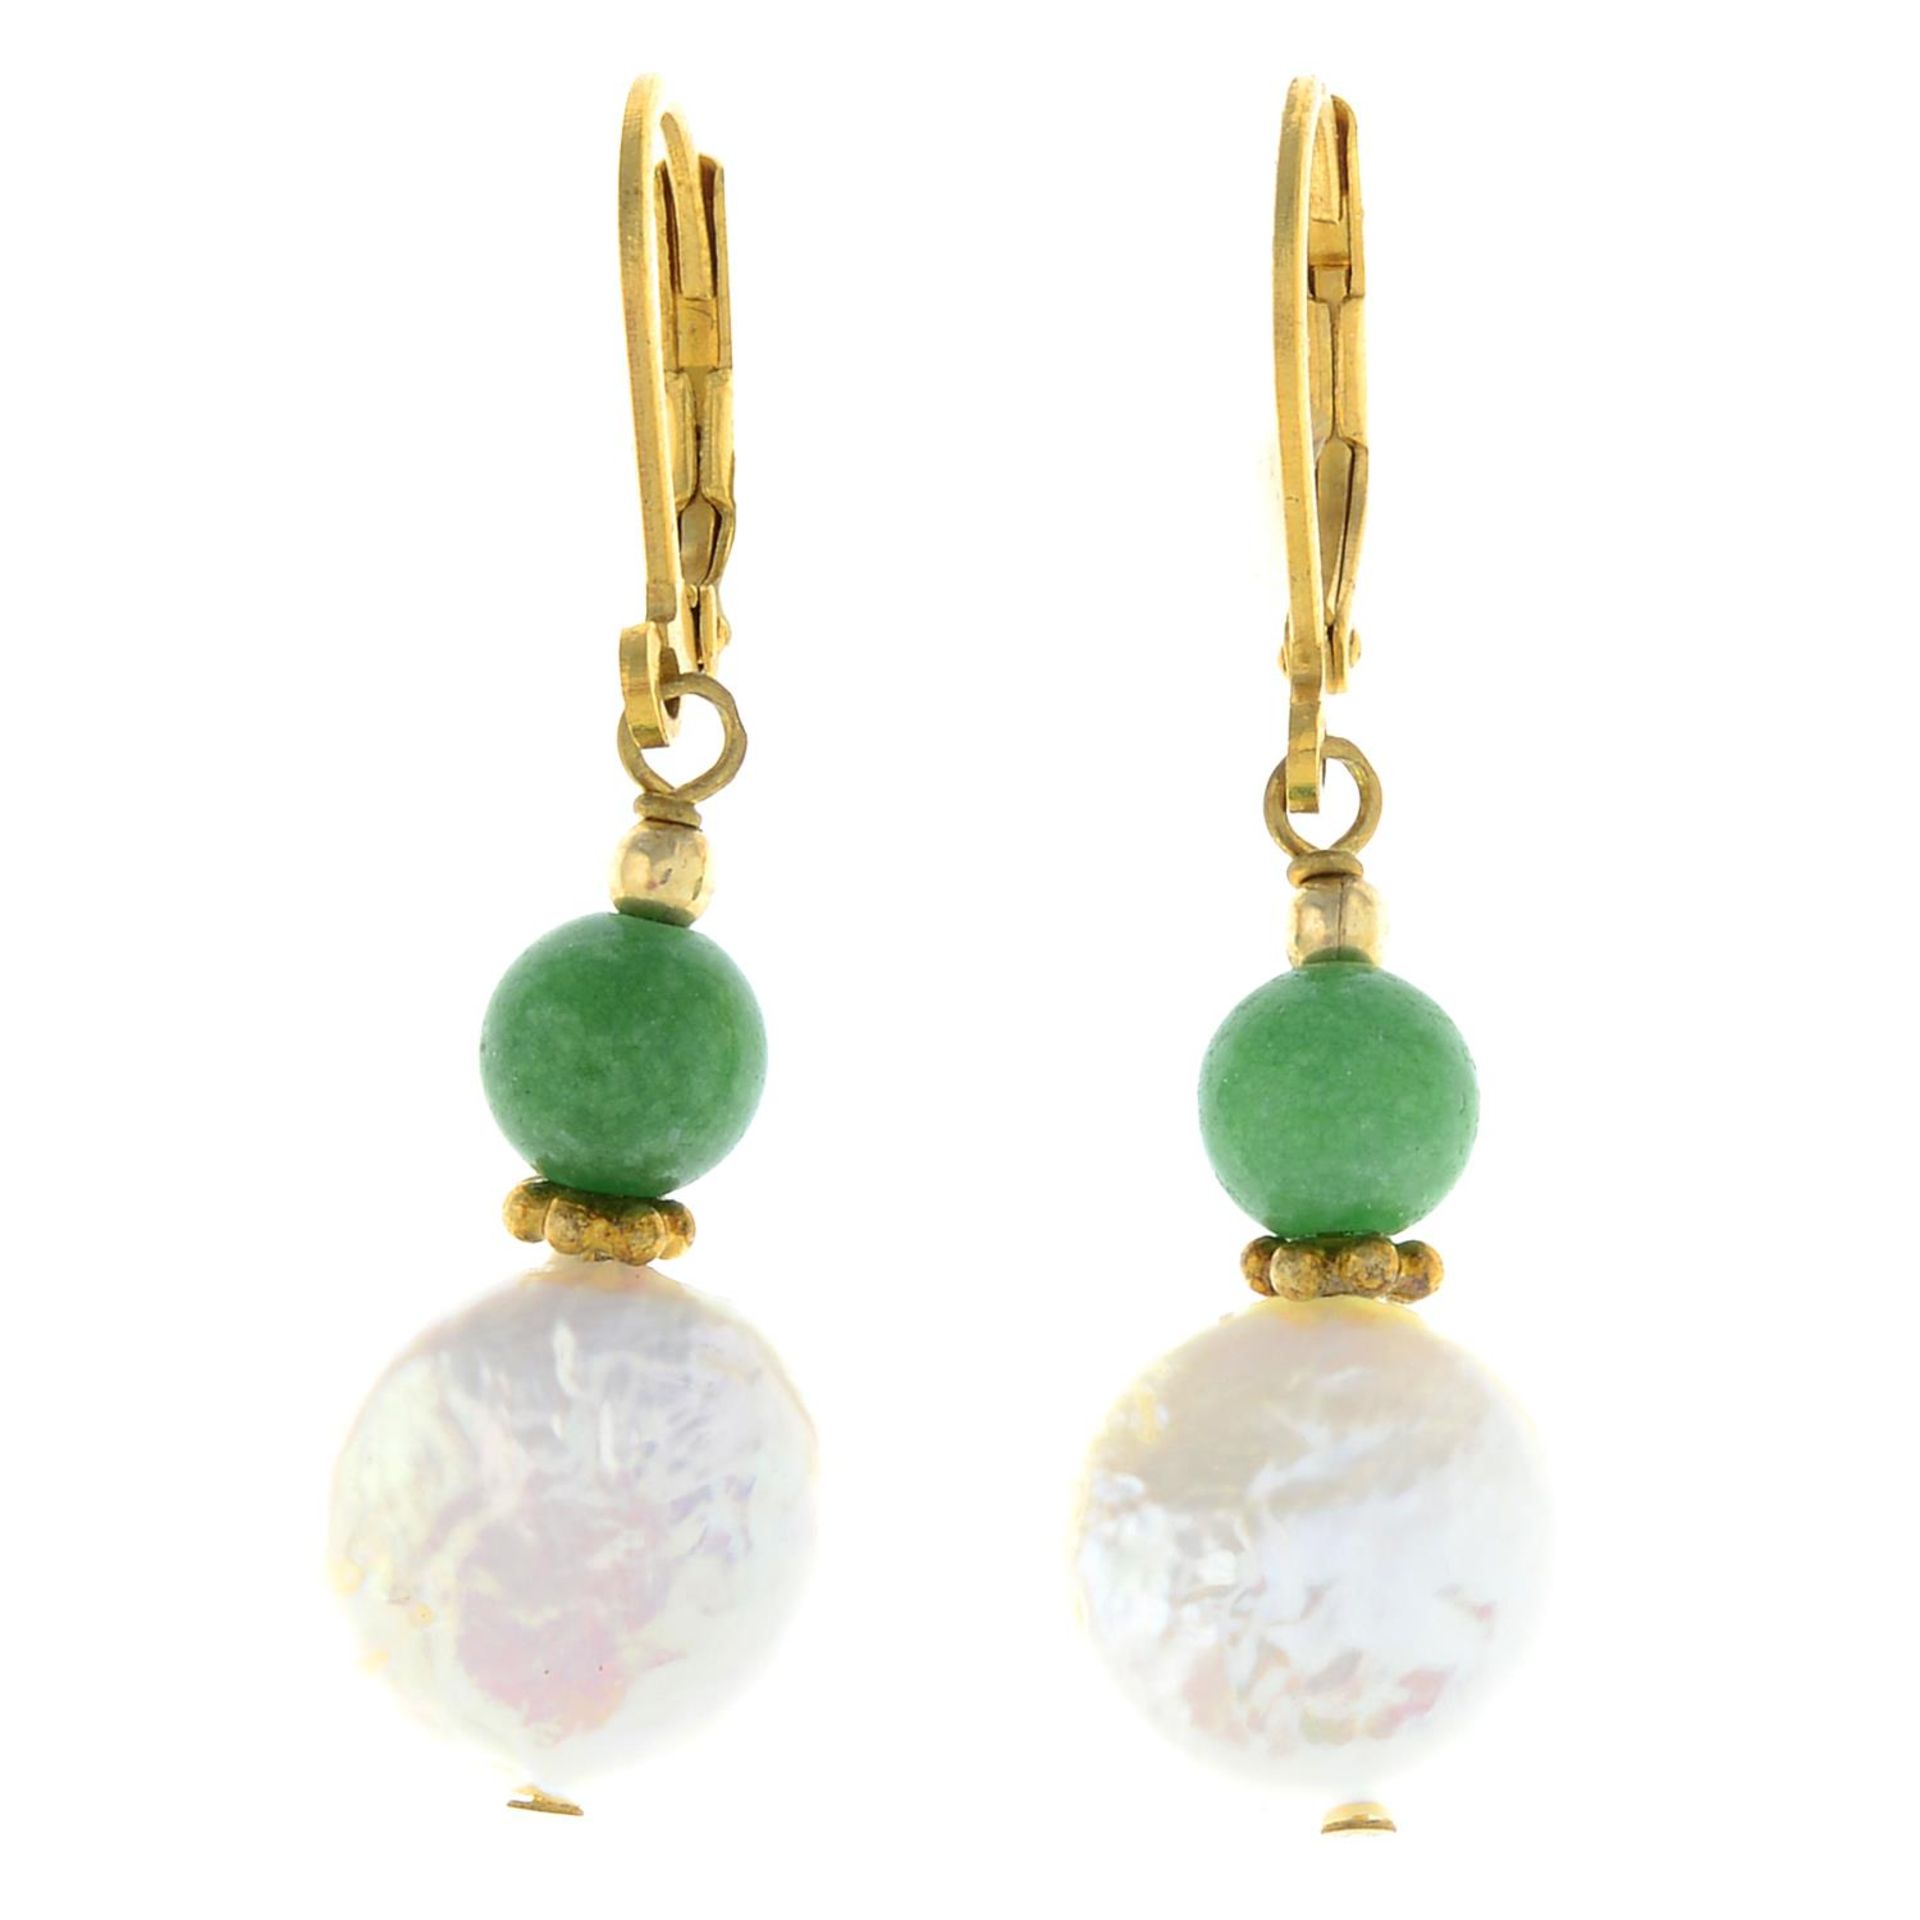 Cultured pearl and malachite drop earrings, length 3cms, total weight 2.8gms.